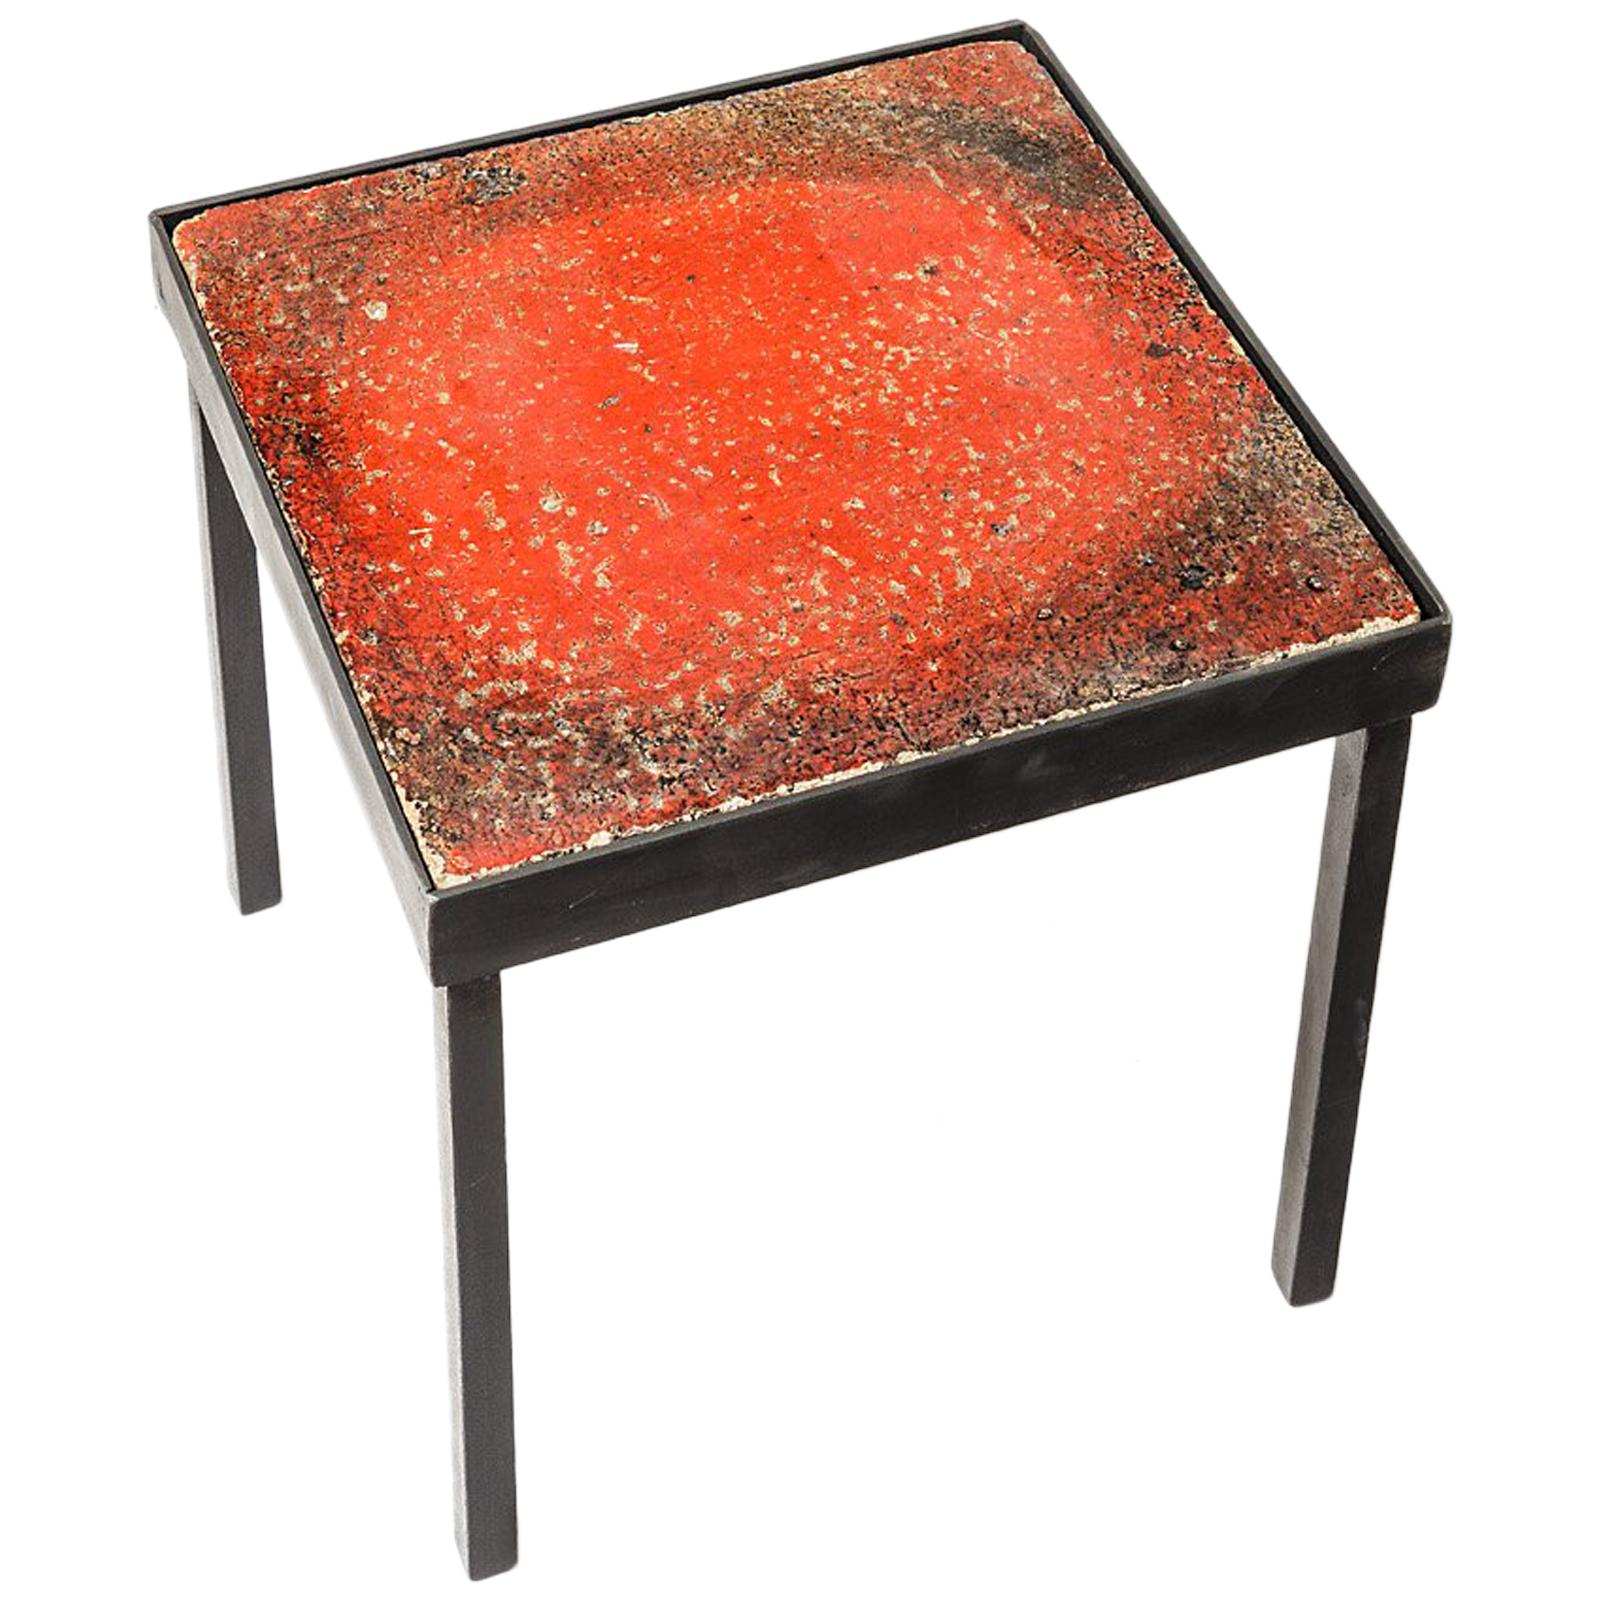 Red Ceramic Low Table or Sofa Table circa 1950 French Production